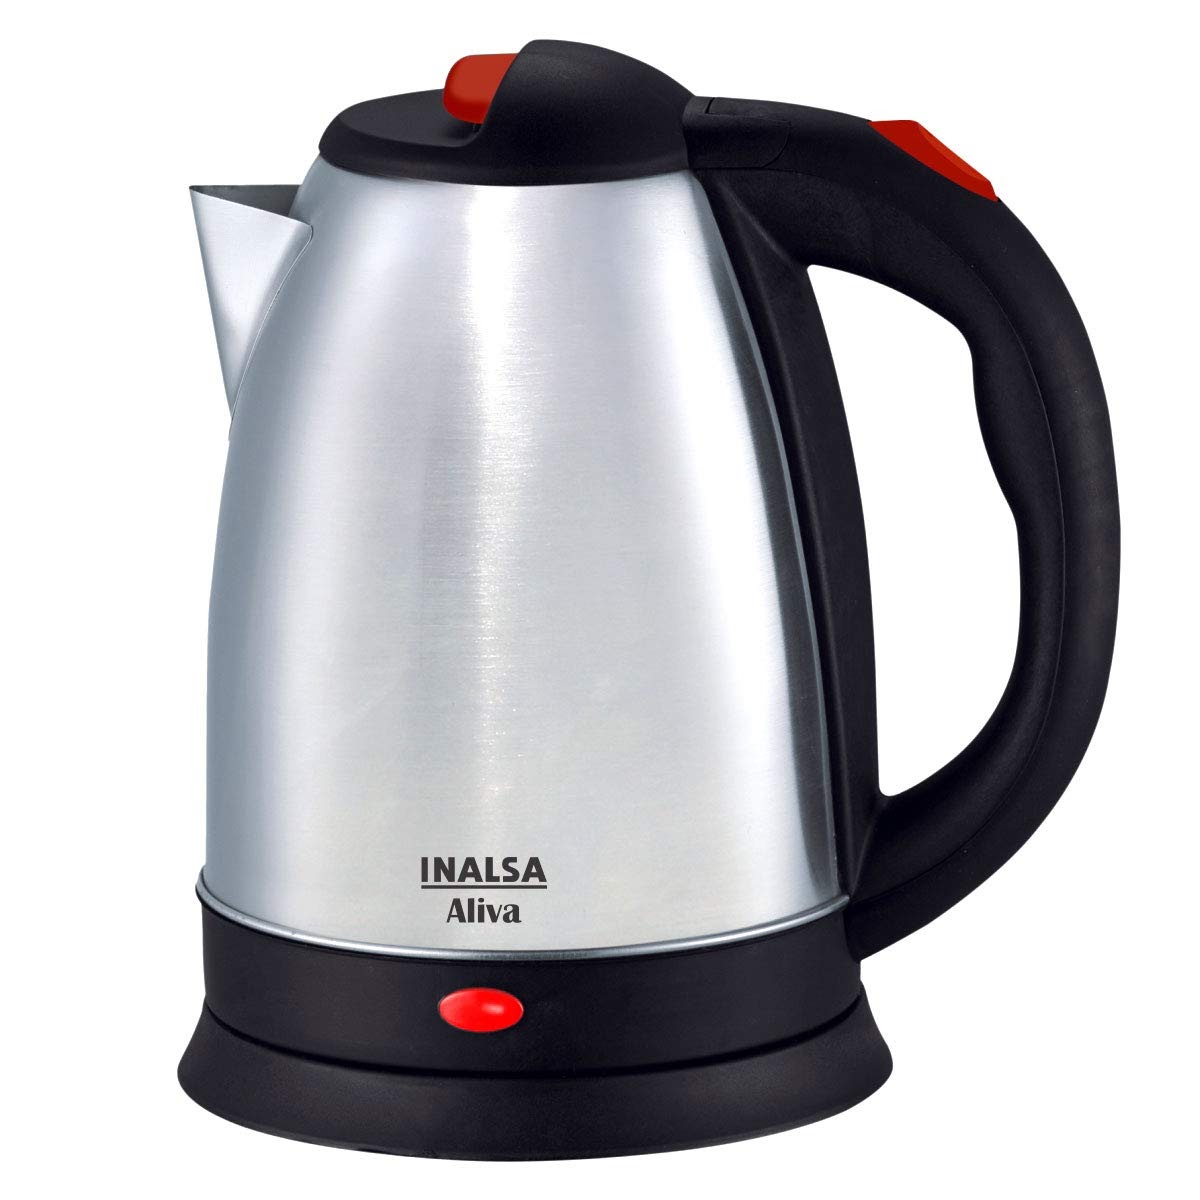 Top Inalsa Electric Kettles Review